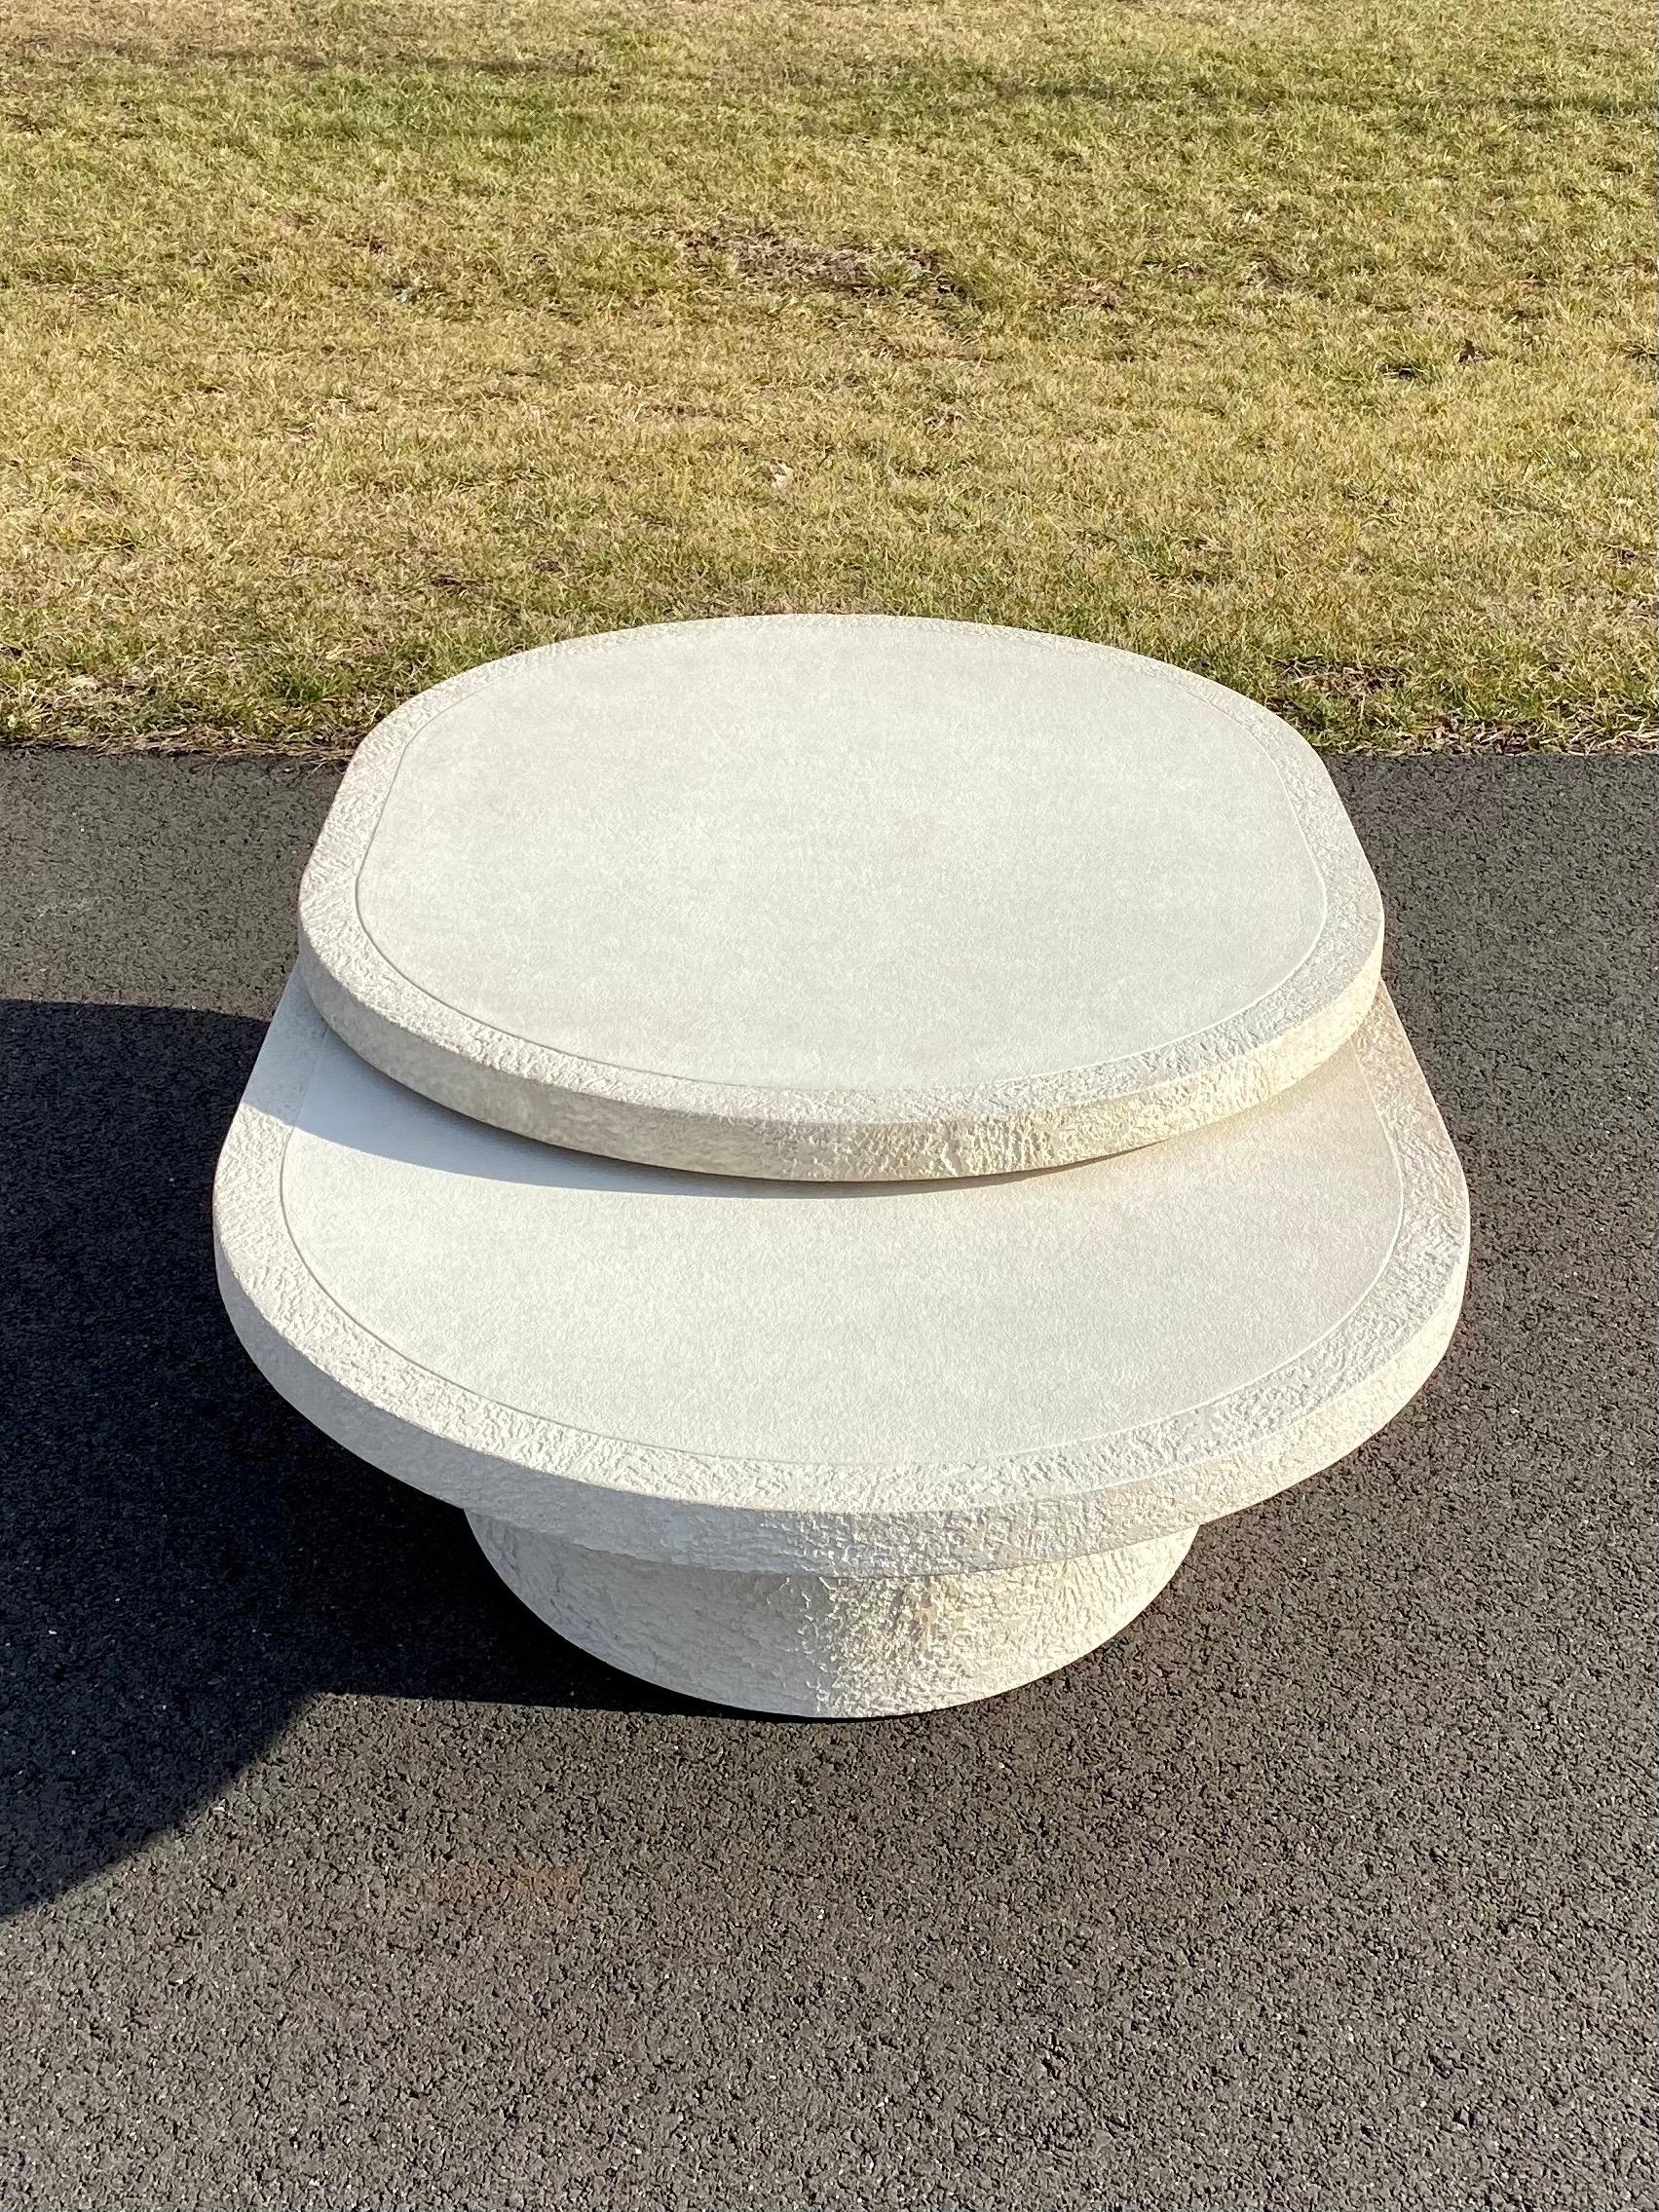 Sculptural Plaster Swiveling Oval Two-Tier Coffee Table, Mid-Century Modern 1970 8